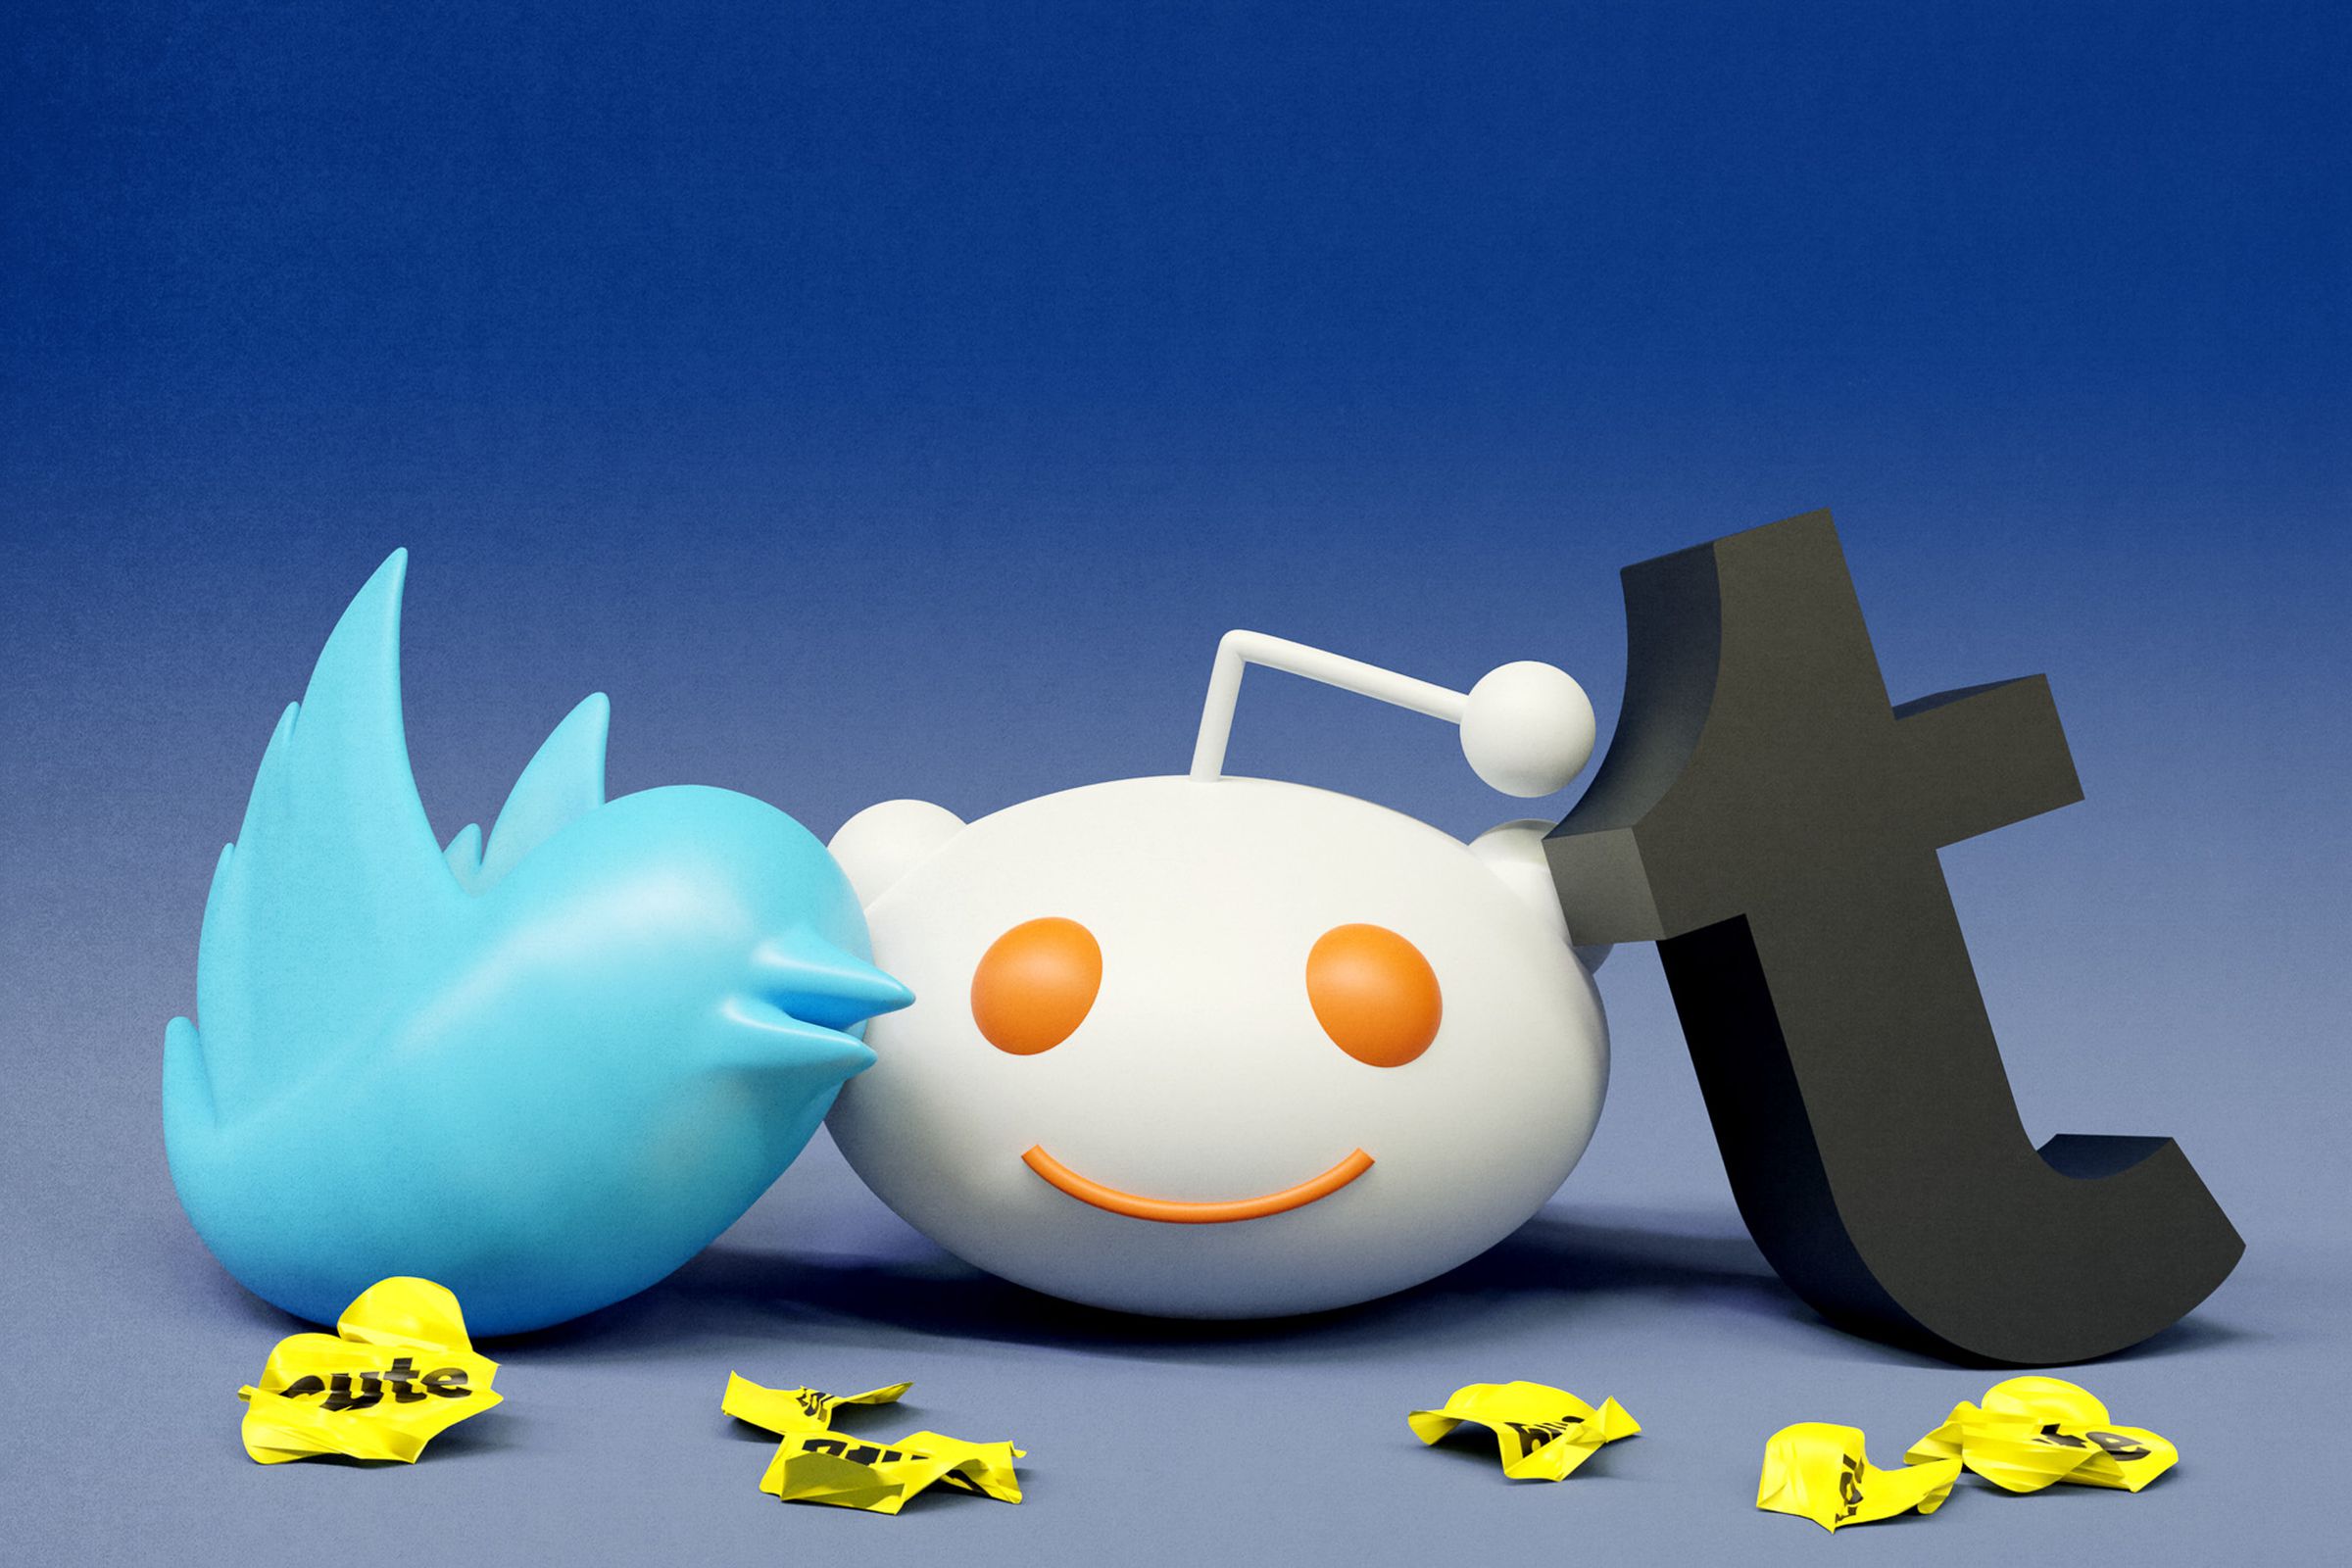 3D versions of the Twitter bird icon, the Reddit alien icon, and the Tumble “T” logo next to a few small crumbled yellow stickers strewn on the ground.